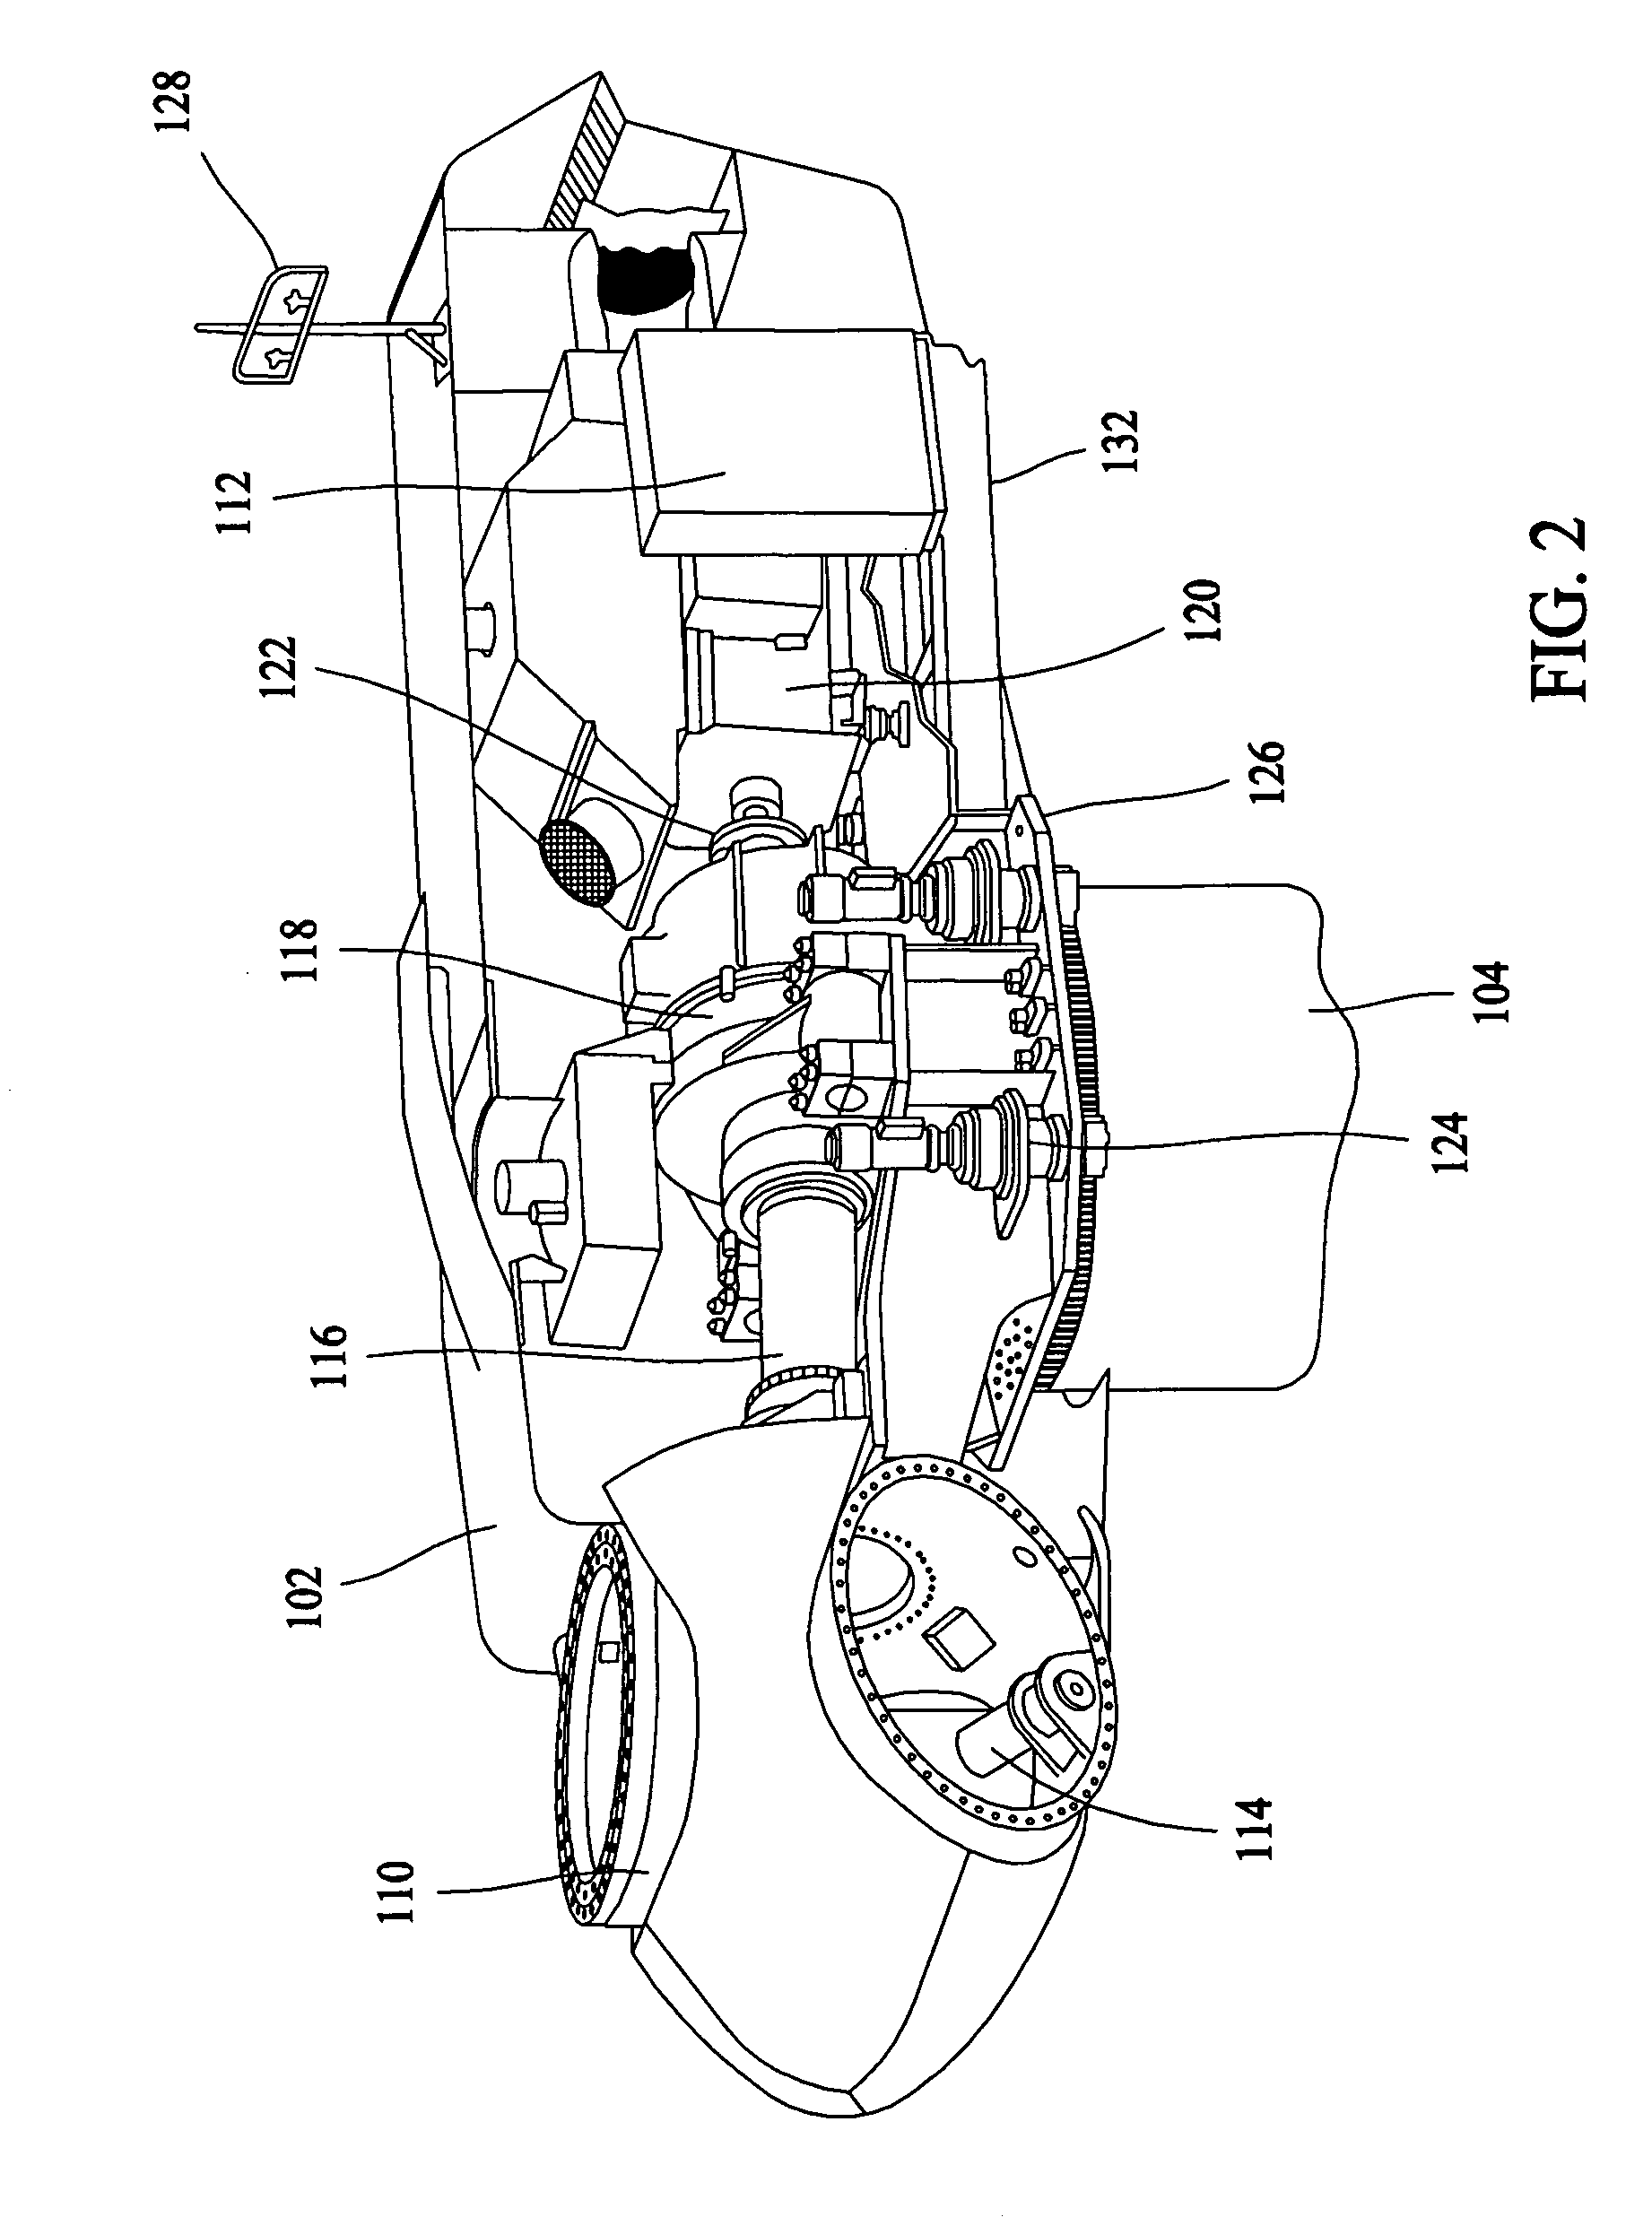 System and method for power control in wind turbines